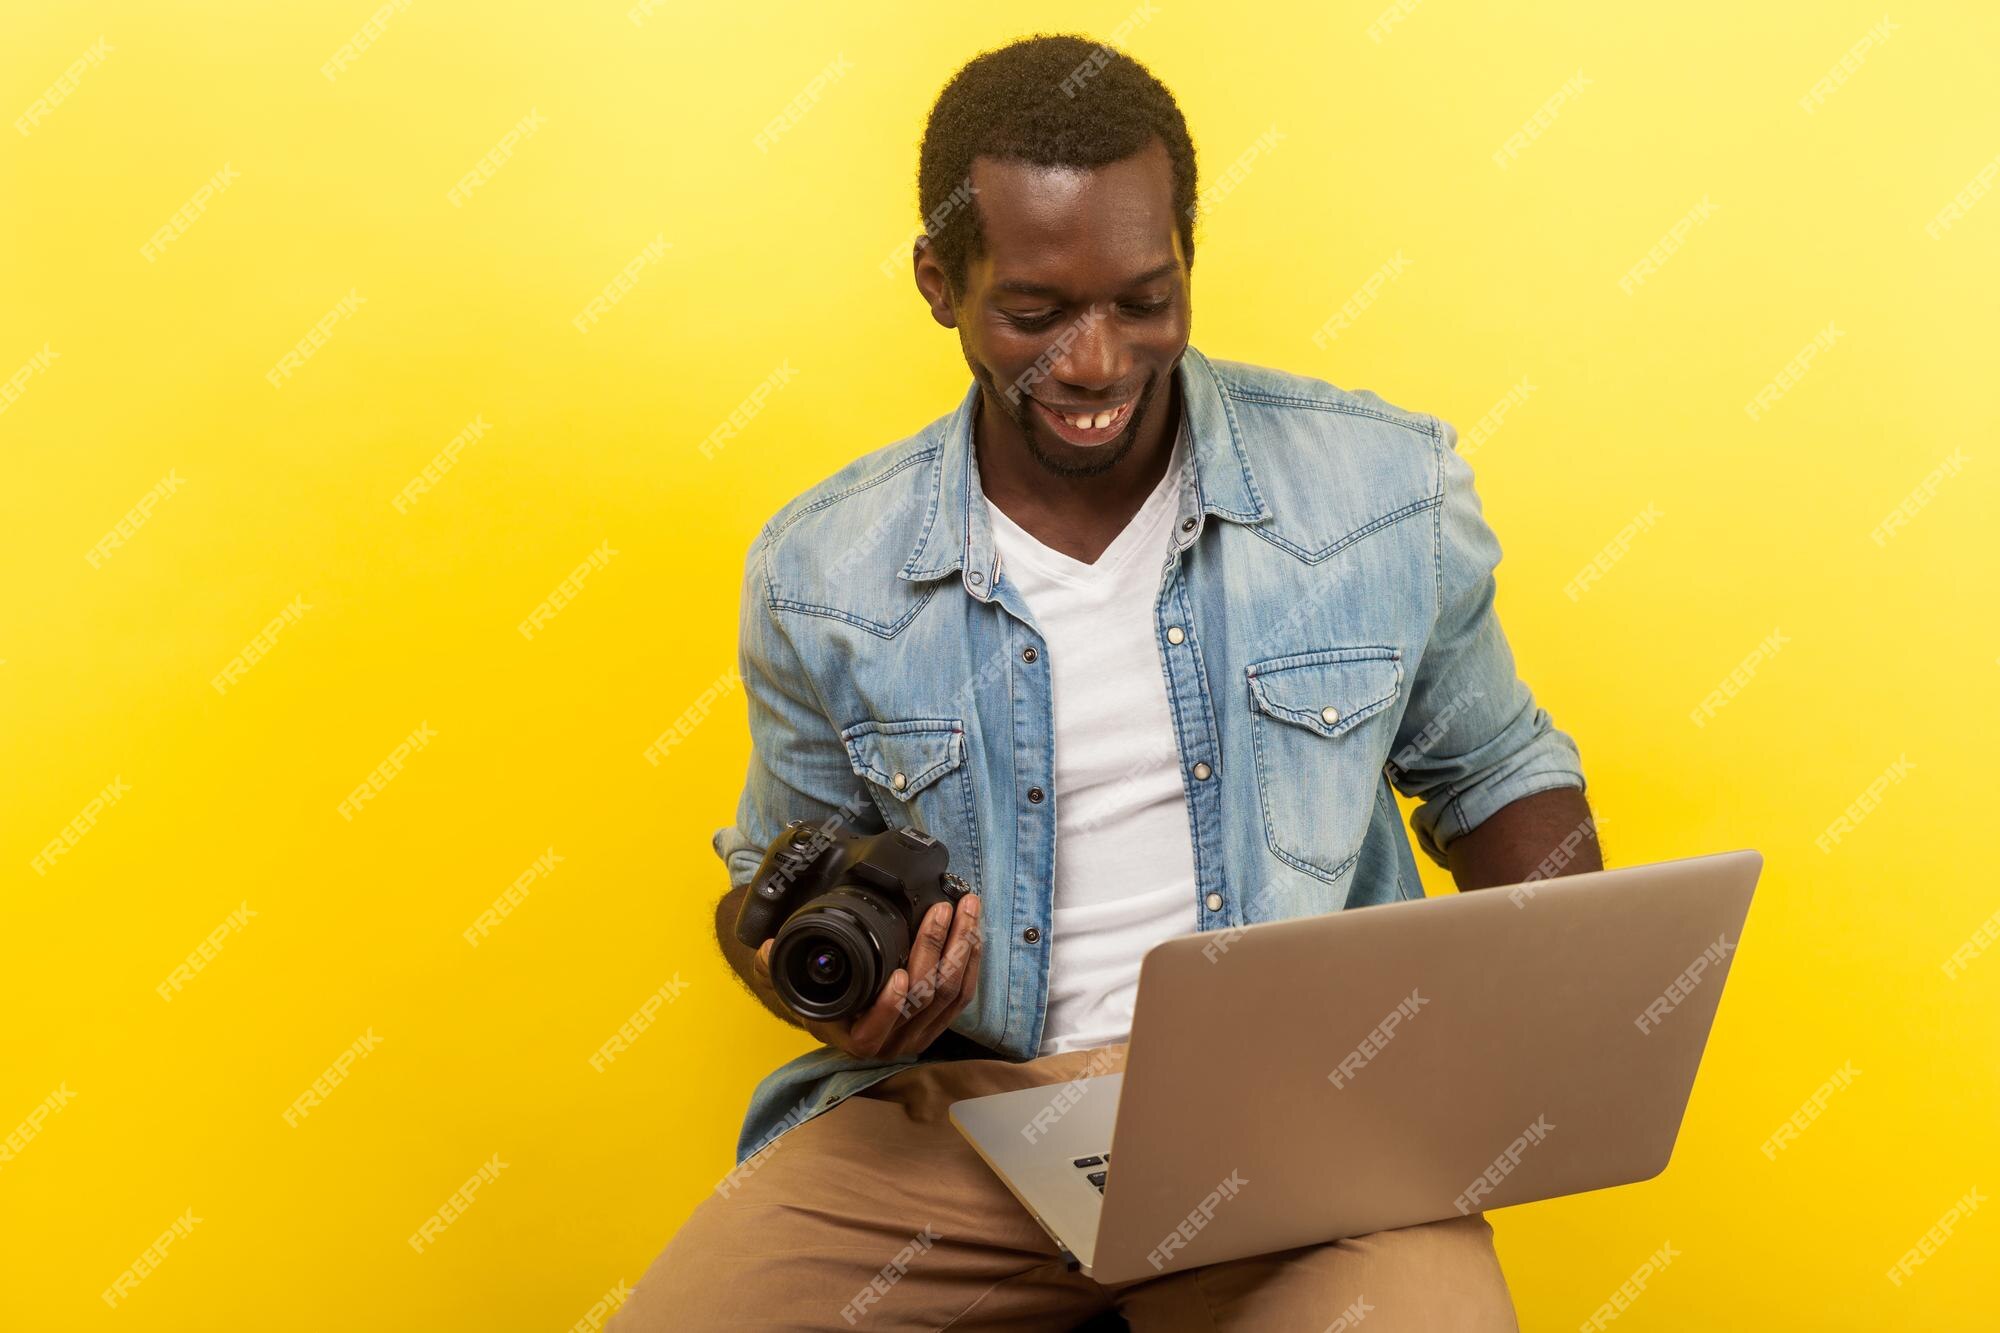 Premium Photo | Portrait of positive male photographer in denim shirt  holding digital dslr camera and laptop going to take picture using photo  editing app on computer studio shot isolated on yellow